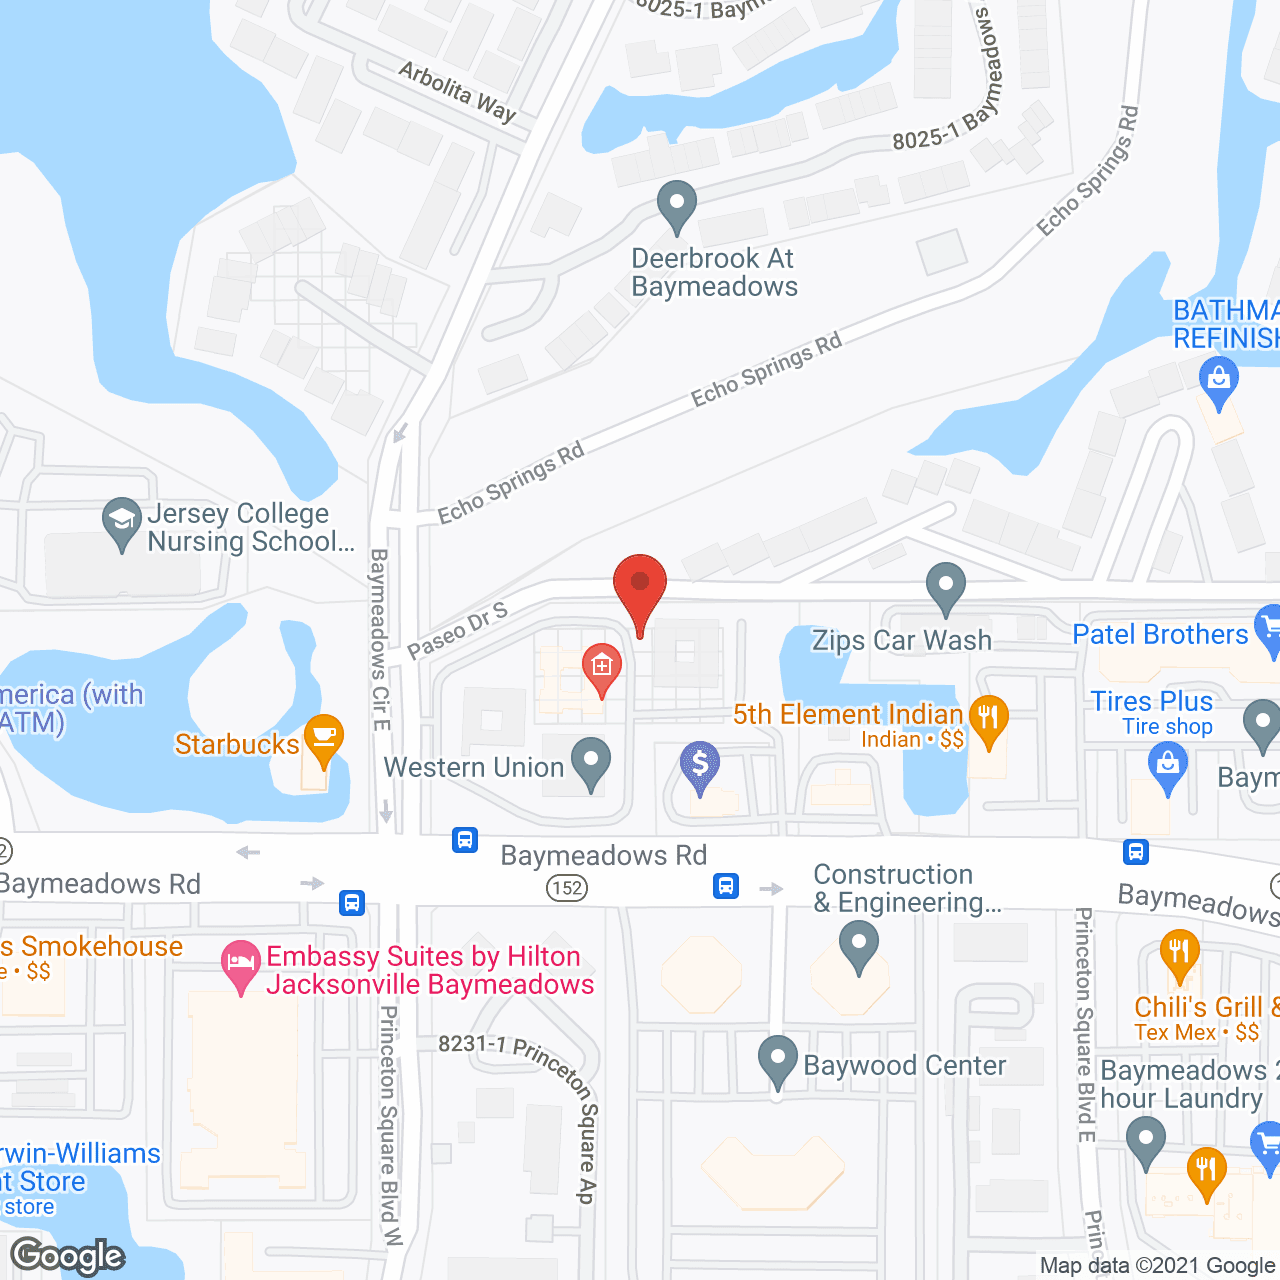 American In-Home Care - Jacksonville, FL in google map